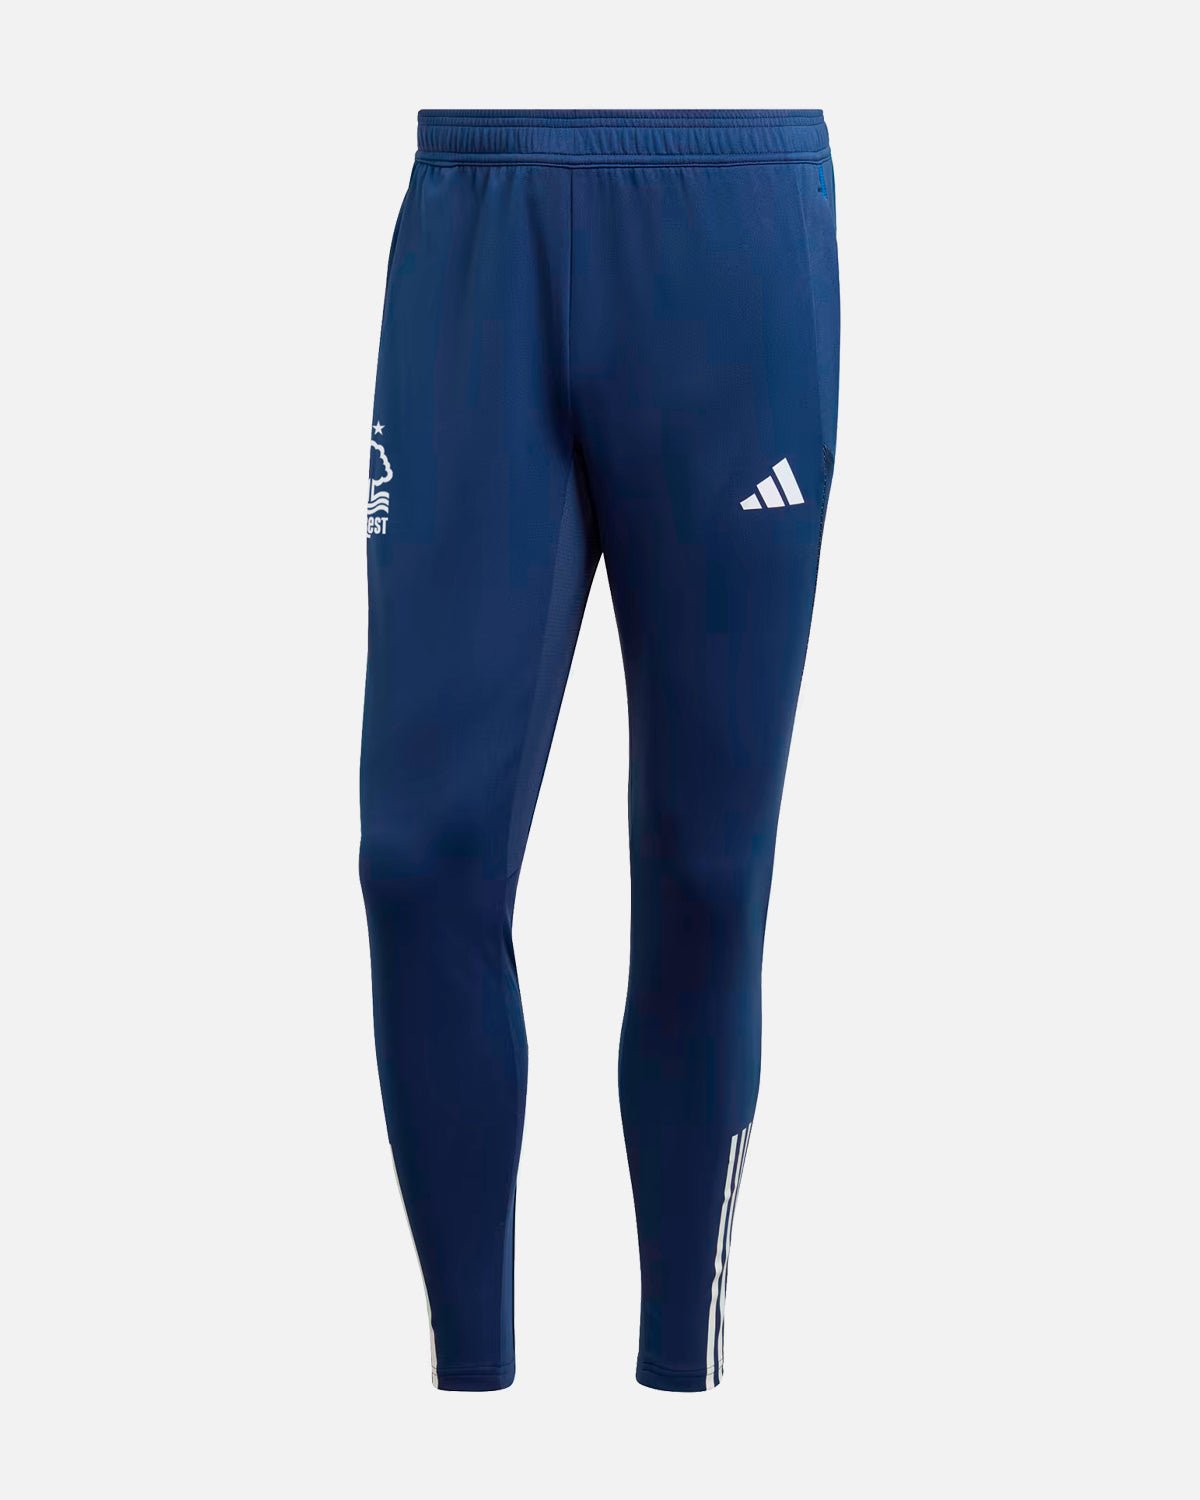 NFFC Navy Training Pants 23-24 - Nottingham Forest FC